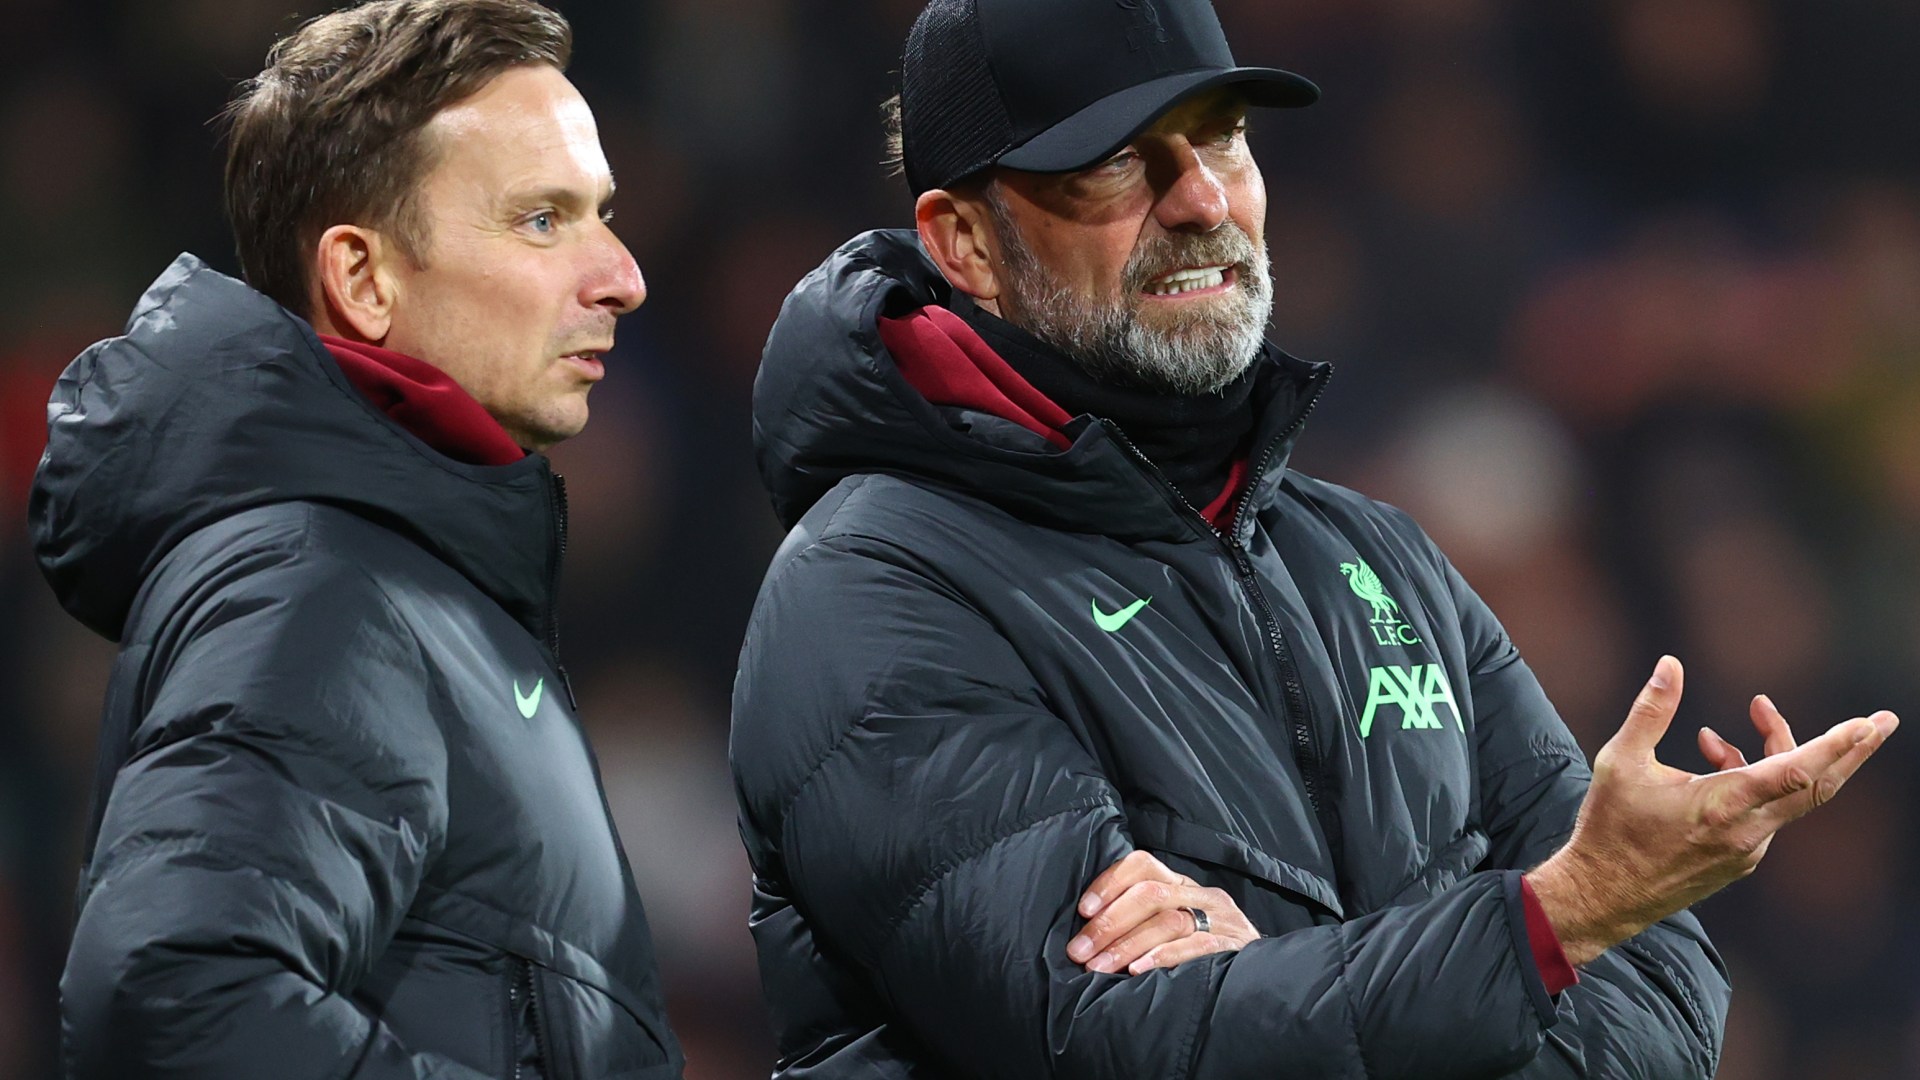 Liverpool No2 Pep Lijnders lands management job with club set to play in major tournament Klopp couldn’t qualify for [Video]